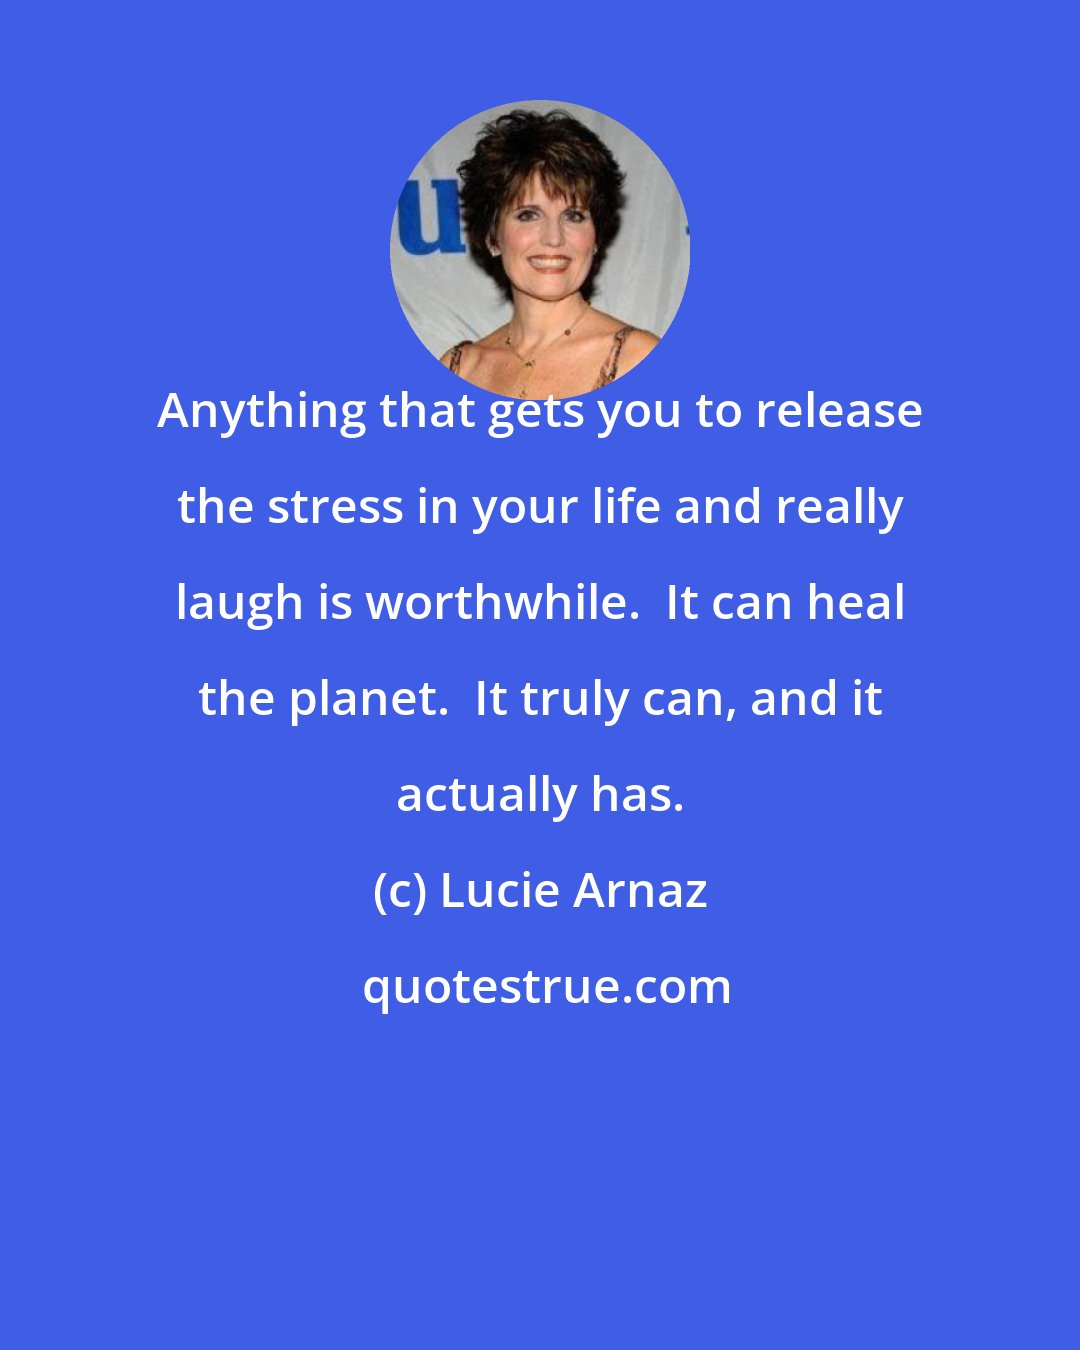 Lucie Arnaz: Anything that gets you to release the stress in your life and really laugh is worthwhile.  It can heal the planet.  It truly can, and it actually has.